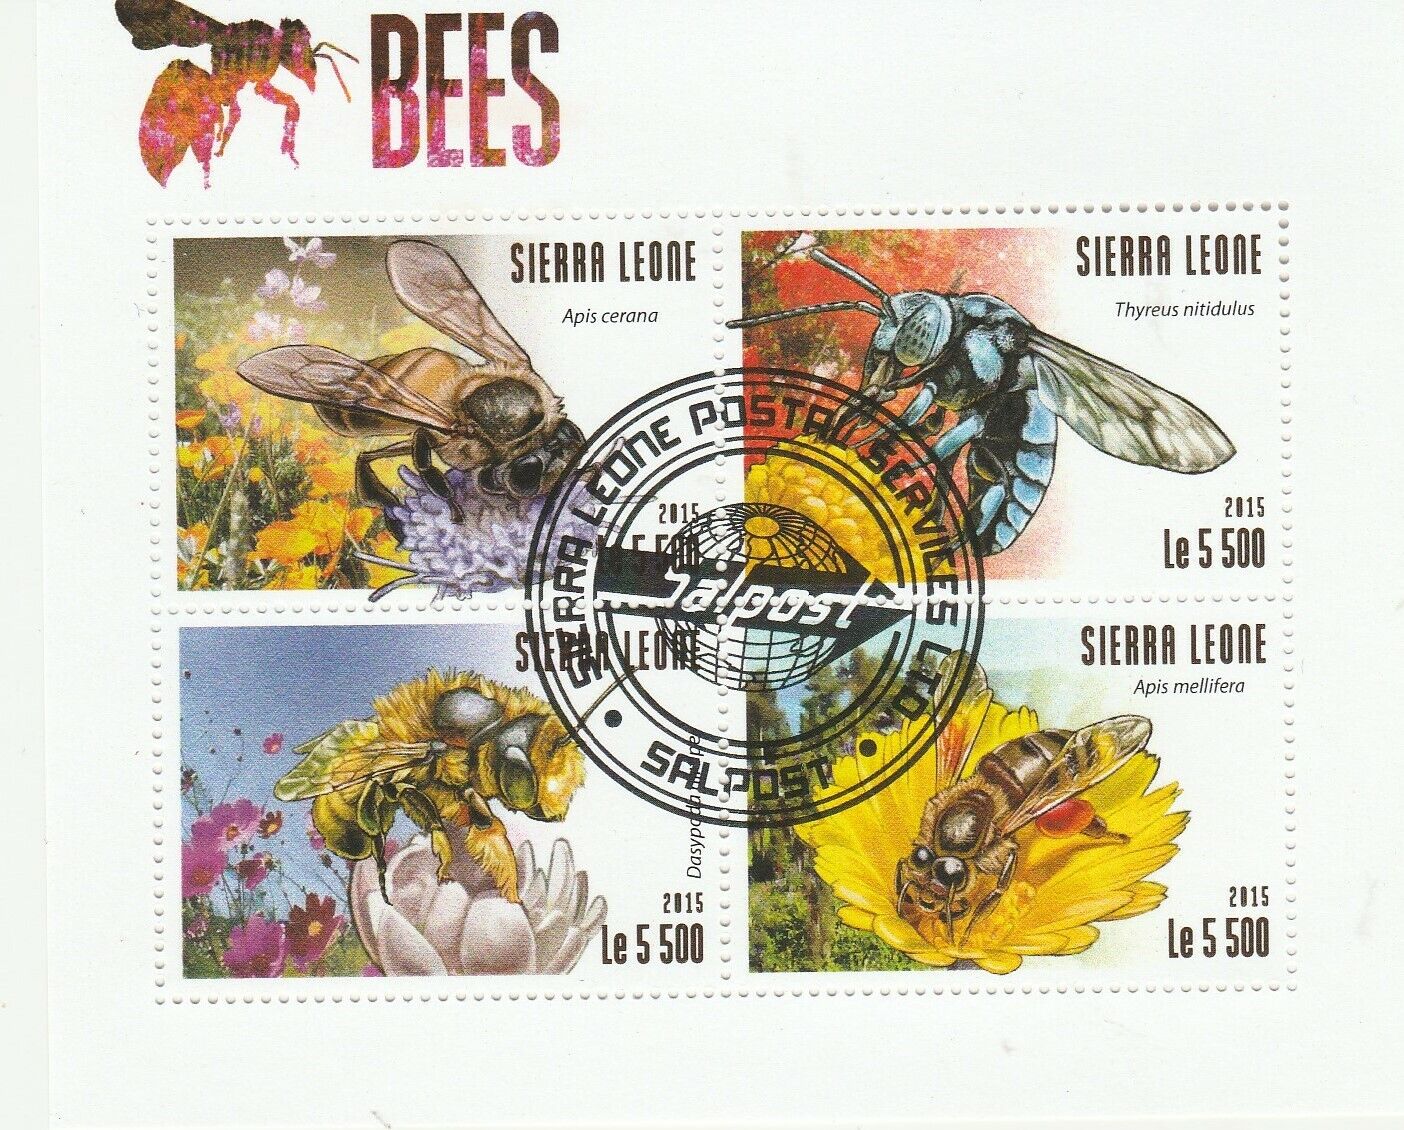 Bees Sierra Our shop most popular Leone 1070 Postmarked Department store 2015